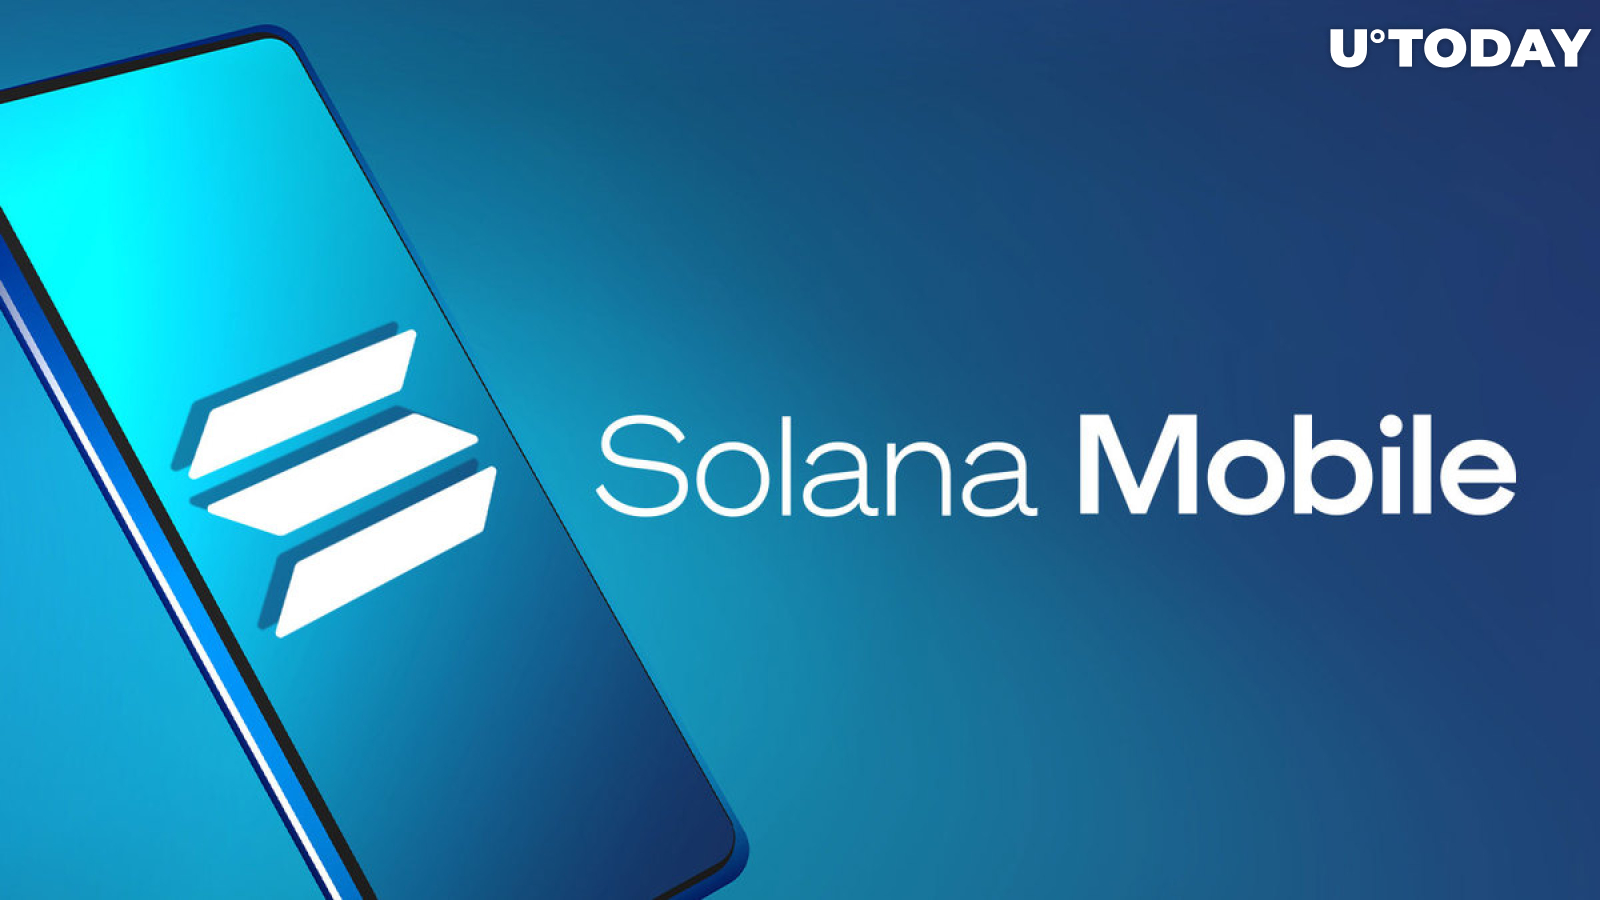 Solana Mobile Phone Now Available for Order by Public